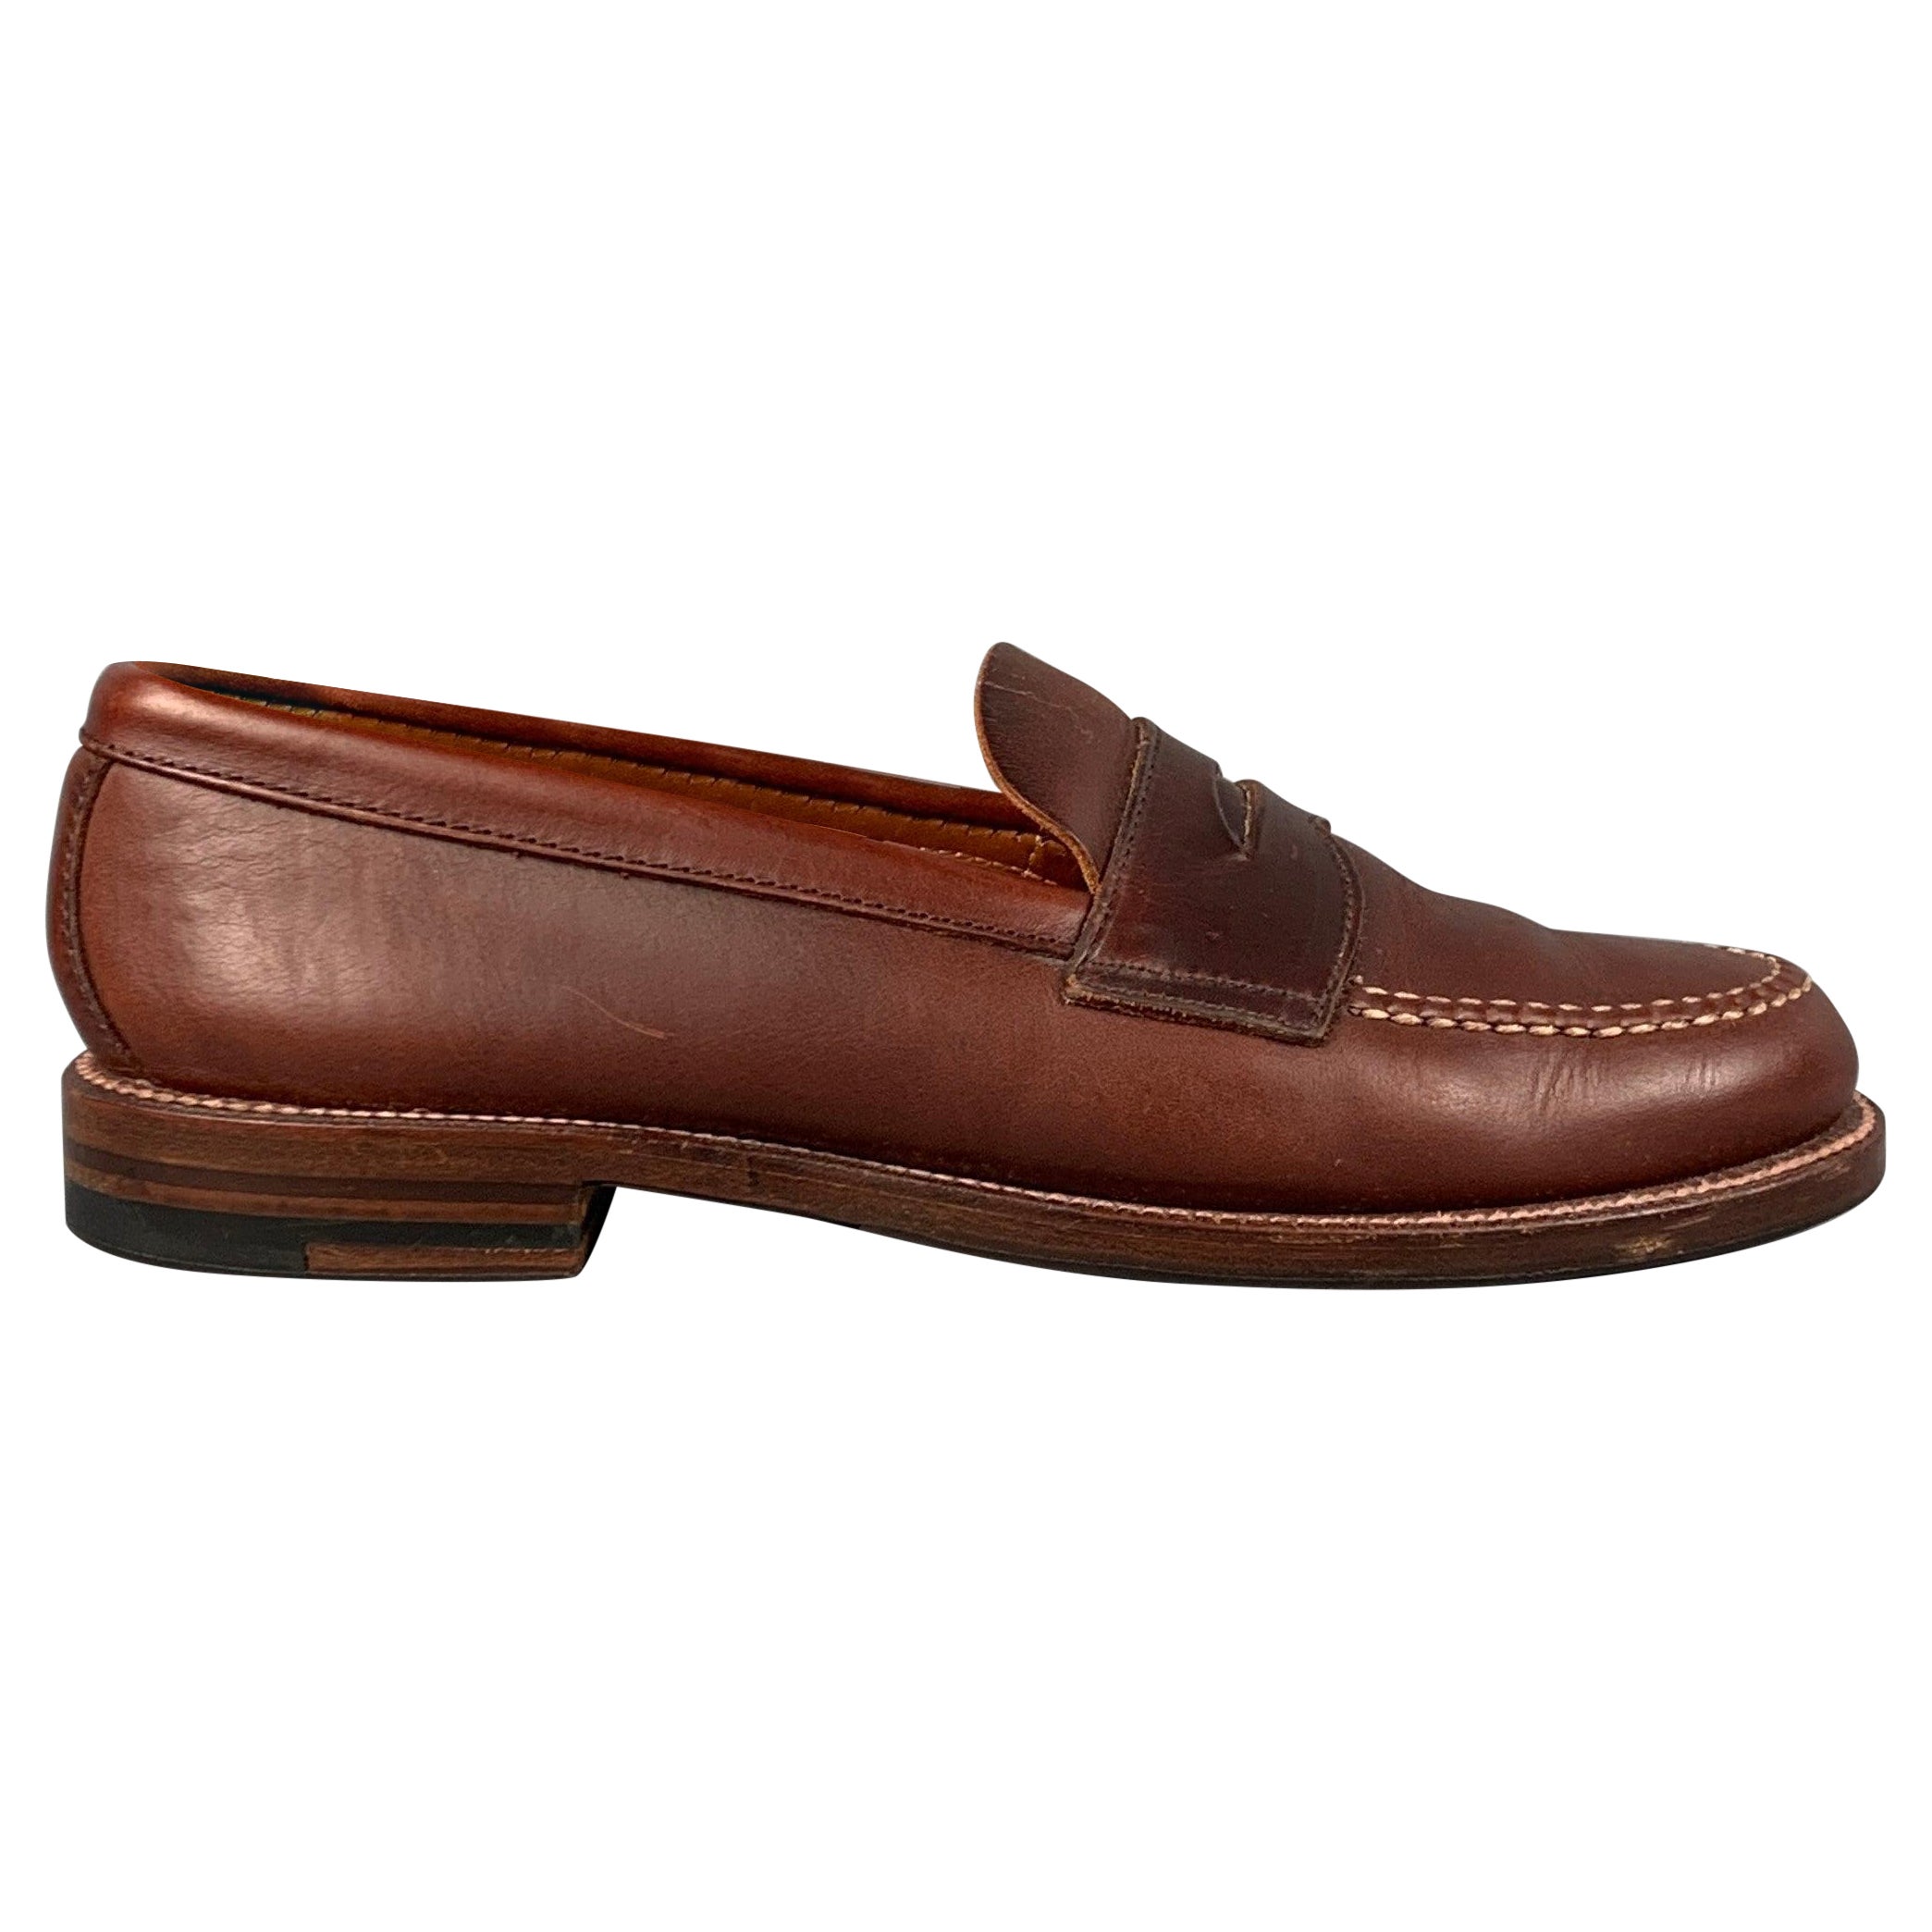 ALDEN Size 6.5 Brown Leather Penny Loafers For Sale